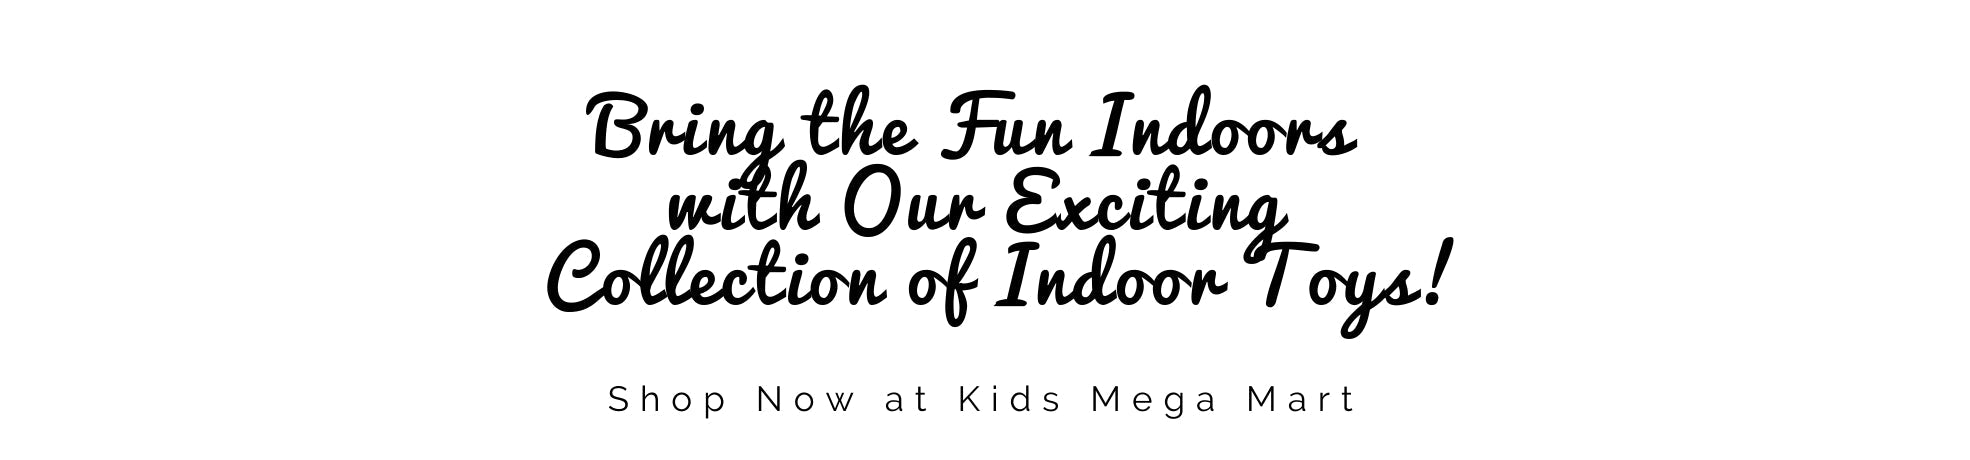 Indoor Toy Collection - Add fun to family time with our diverse selection of creative toys for kids at Kids Mega Mart Australia